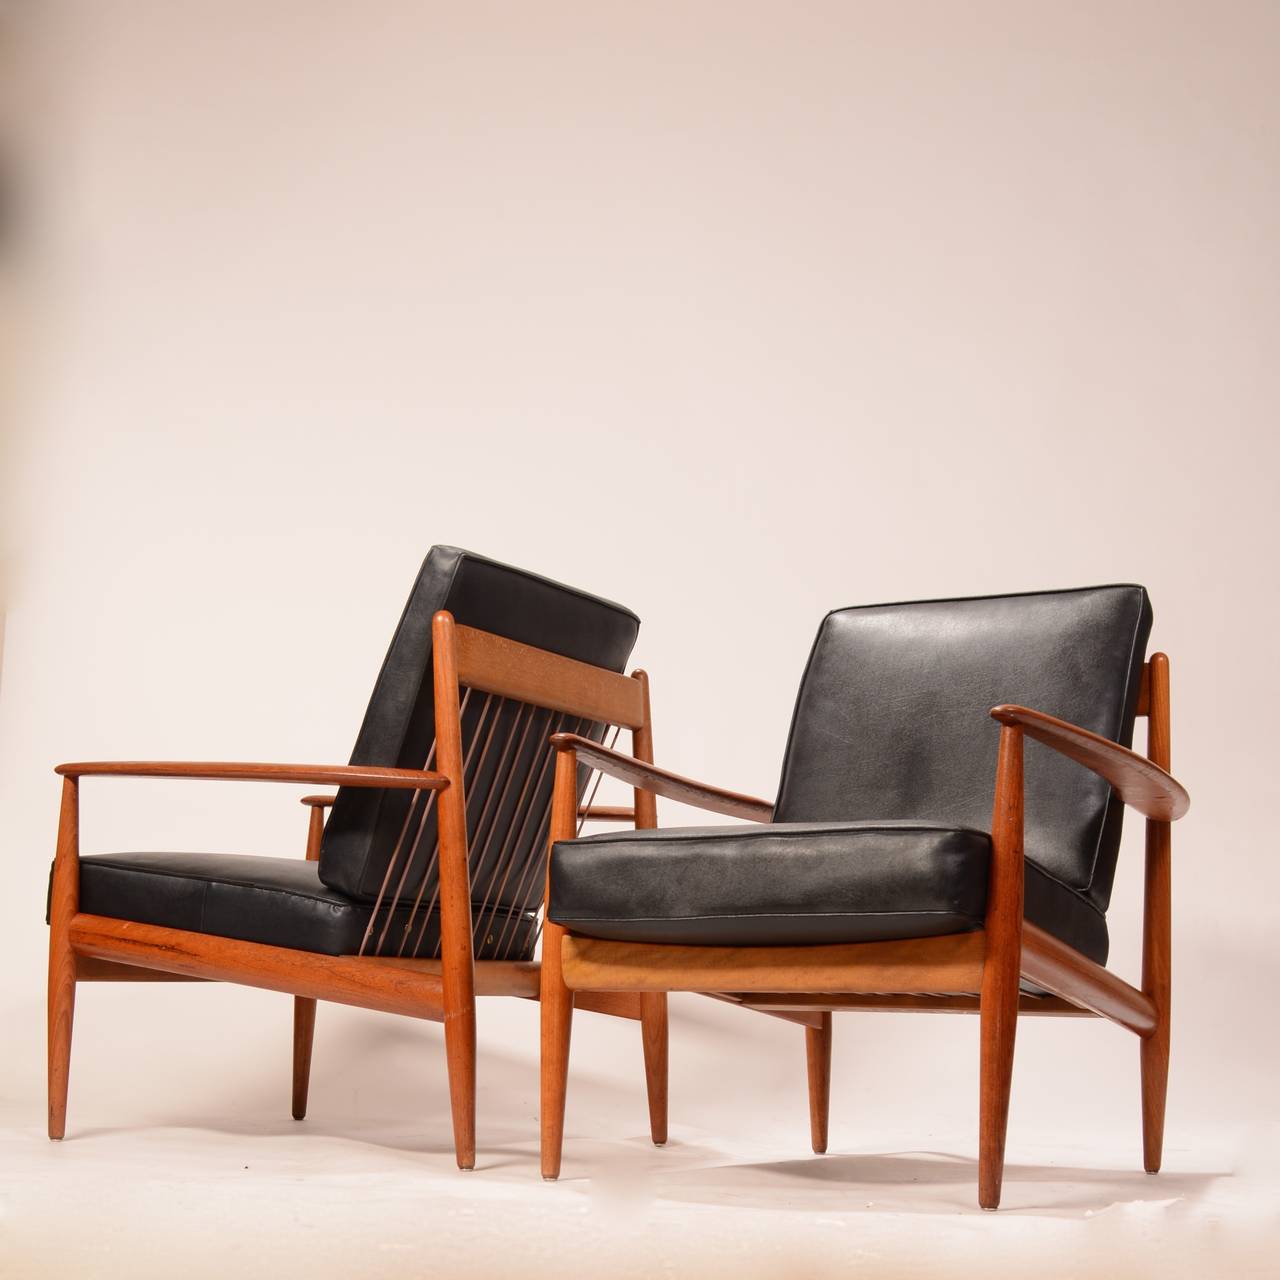 Danish Early Grete Jalk Teak Lounge Chairs with Banding Backs and Seats